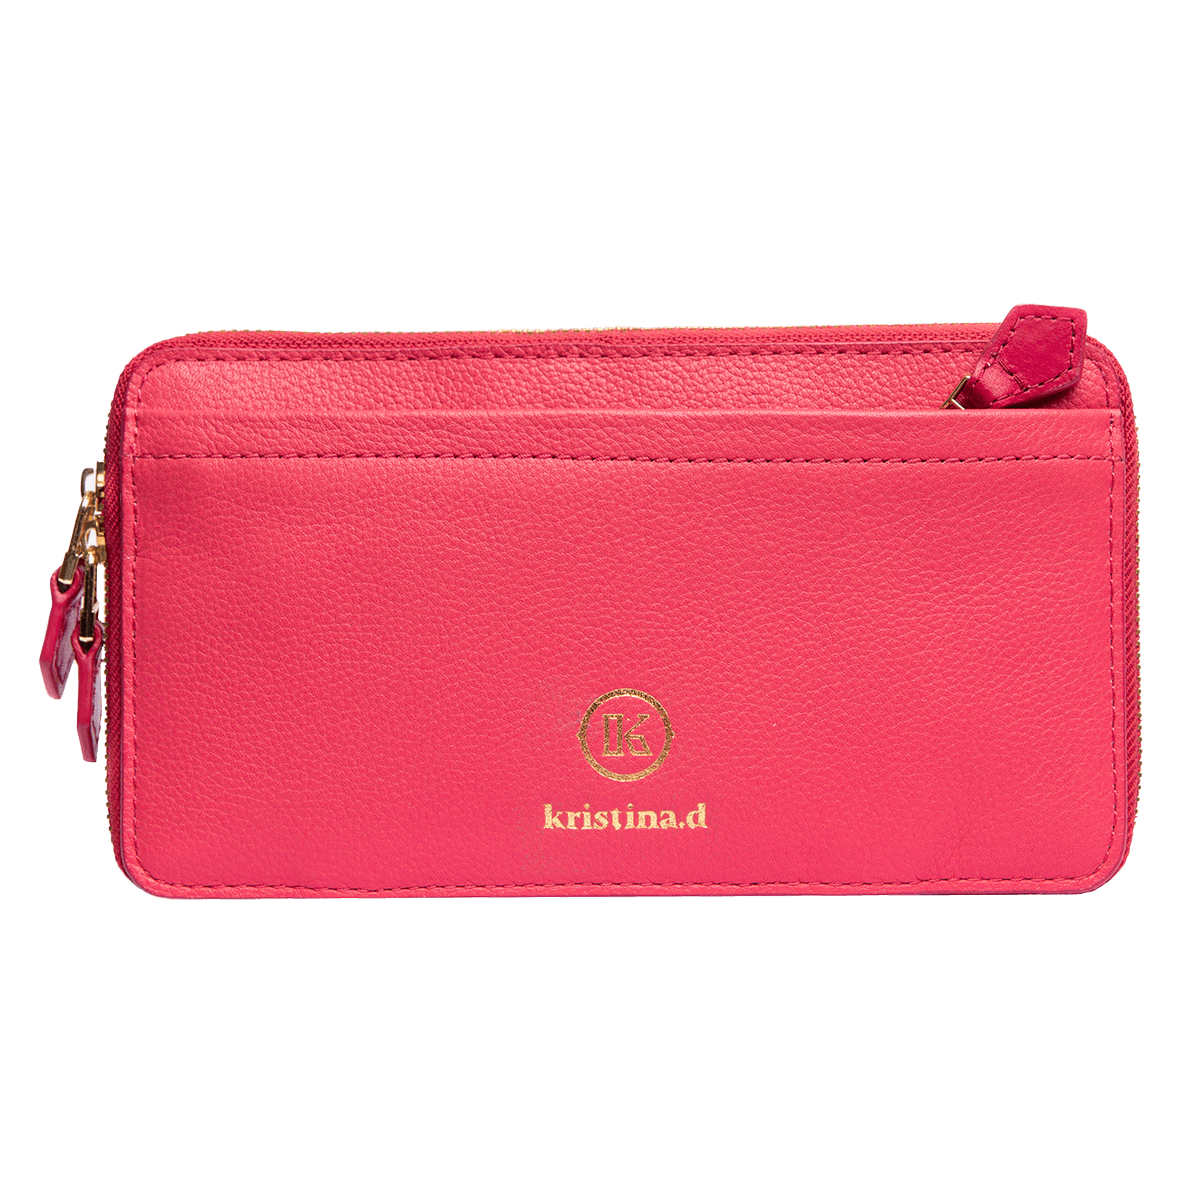 Front view of kristina.d luxury pink leather JULIAN Belt Bag Convertible Wallet